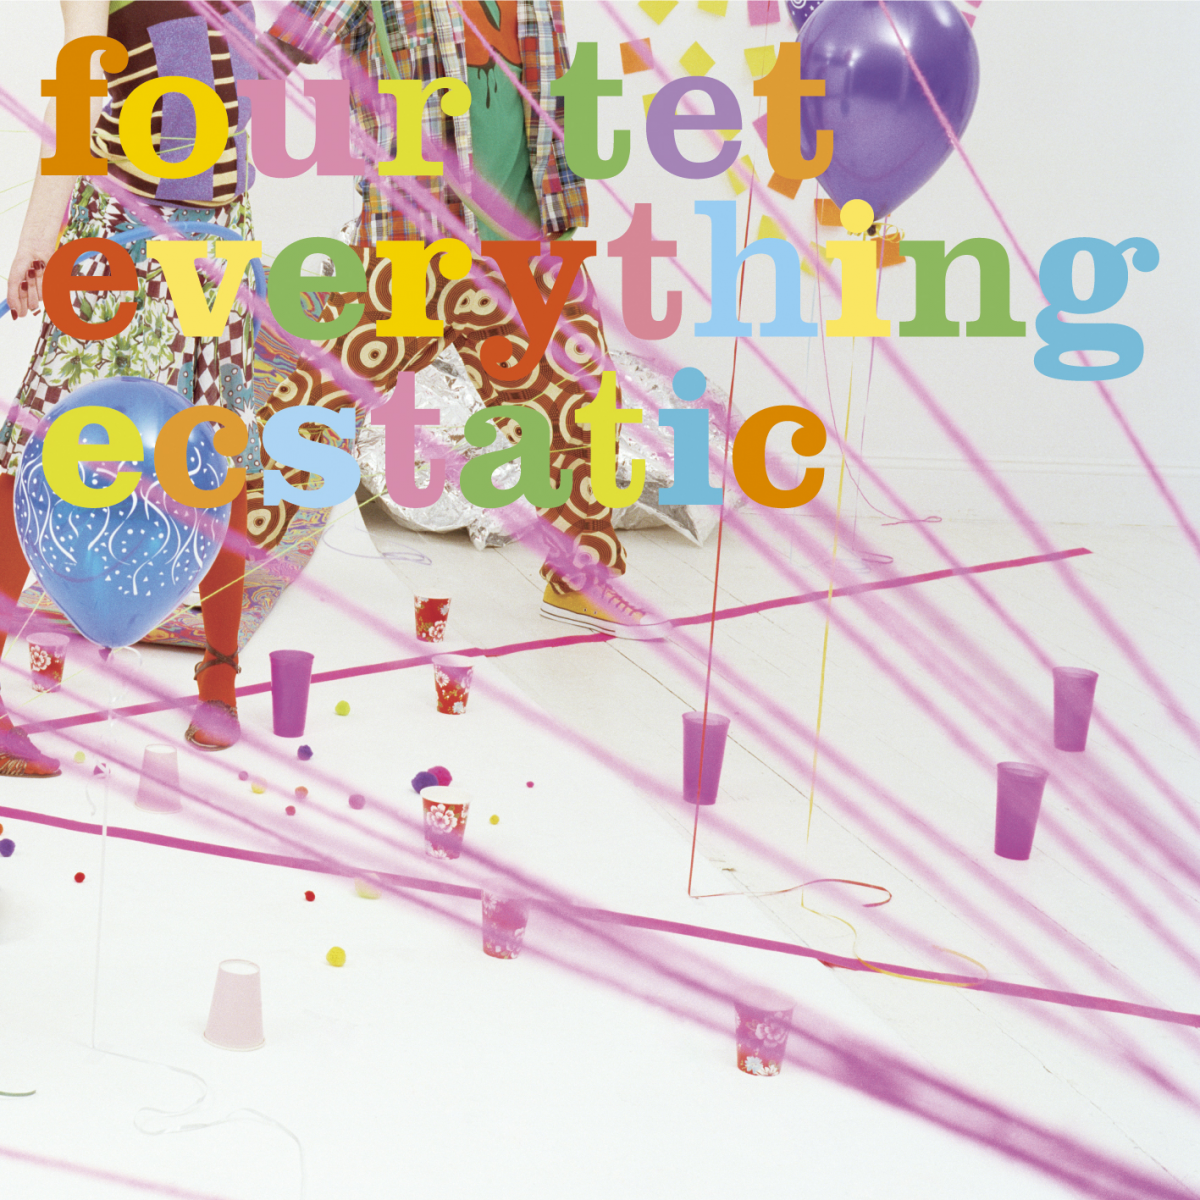 Domino Records Four Tet - Everything Ecstatic